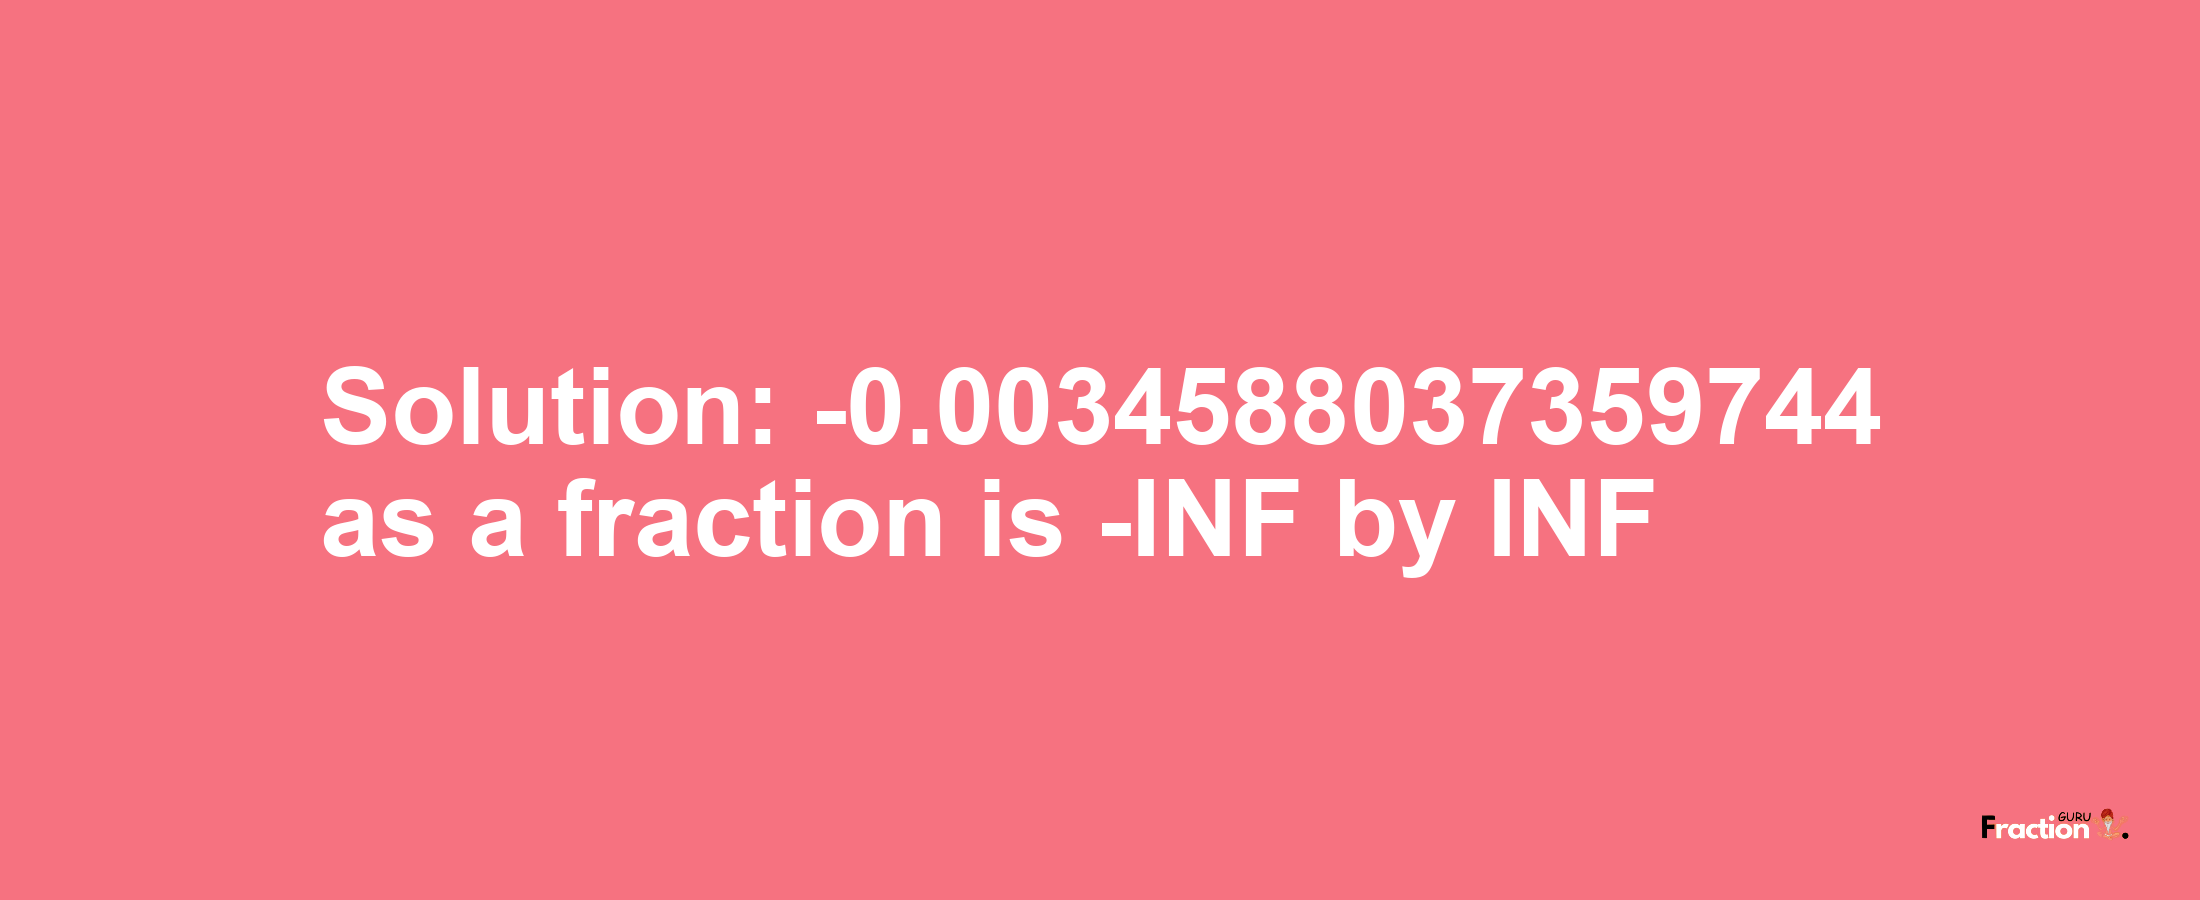 Solution:-0.0034588037359744 as a fraction is -INF/INF